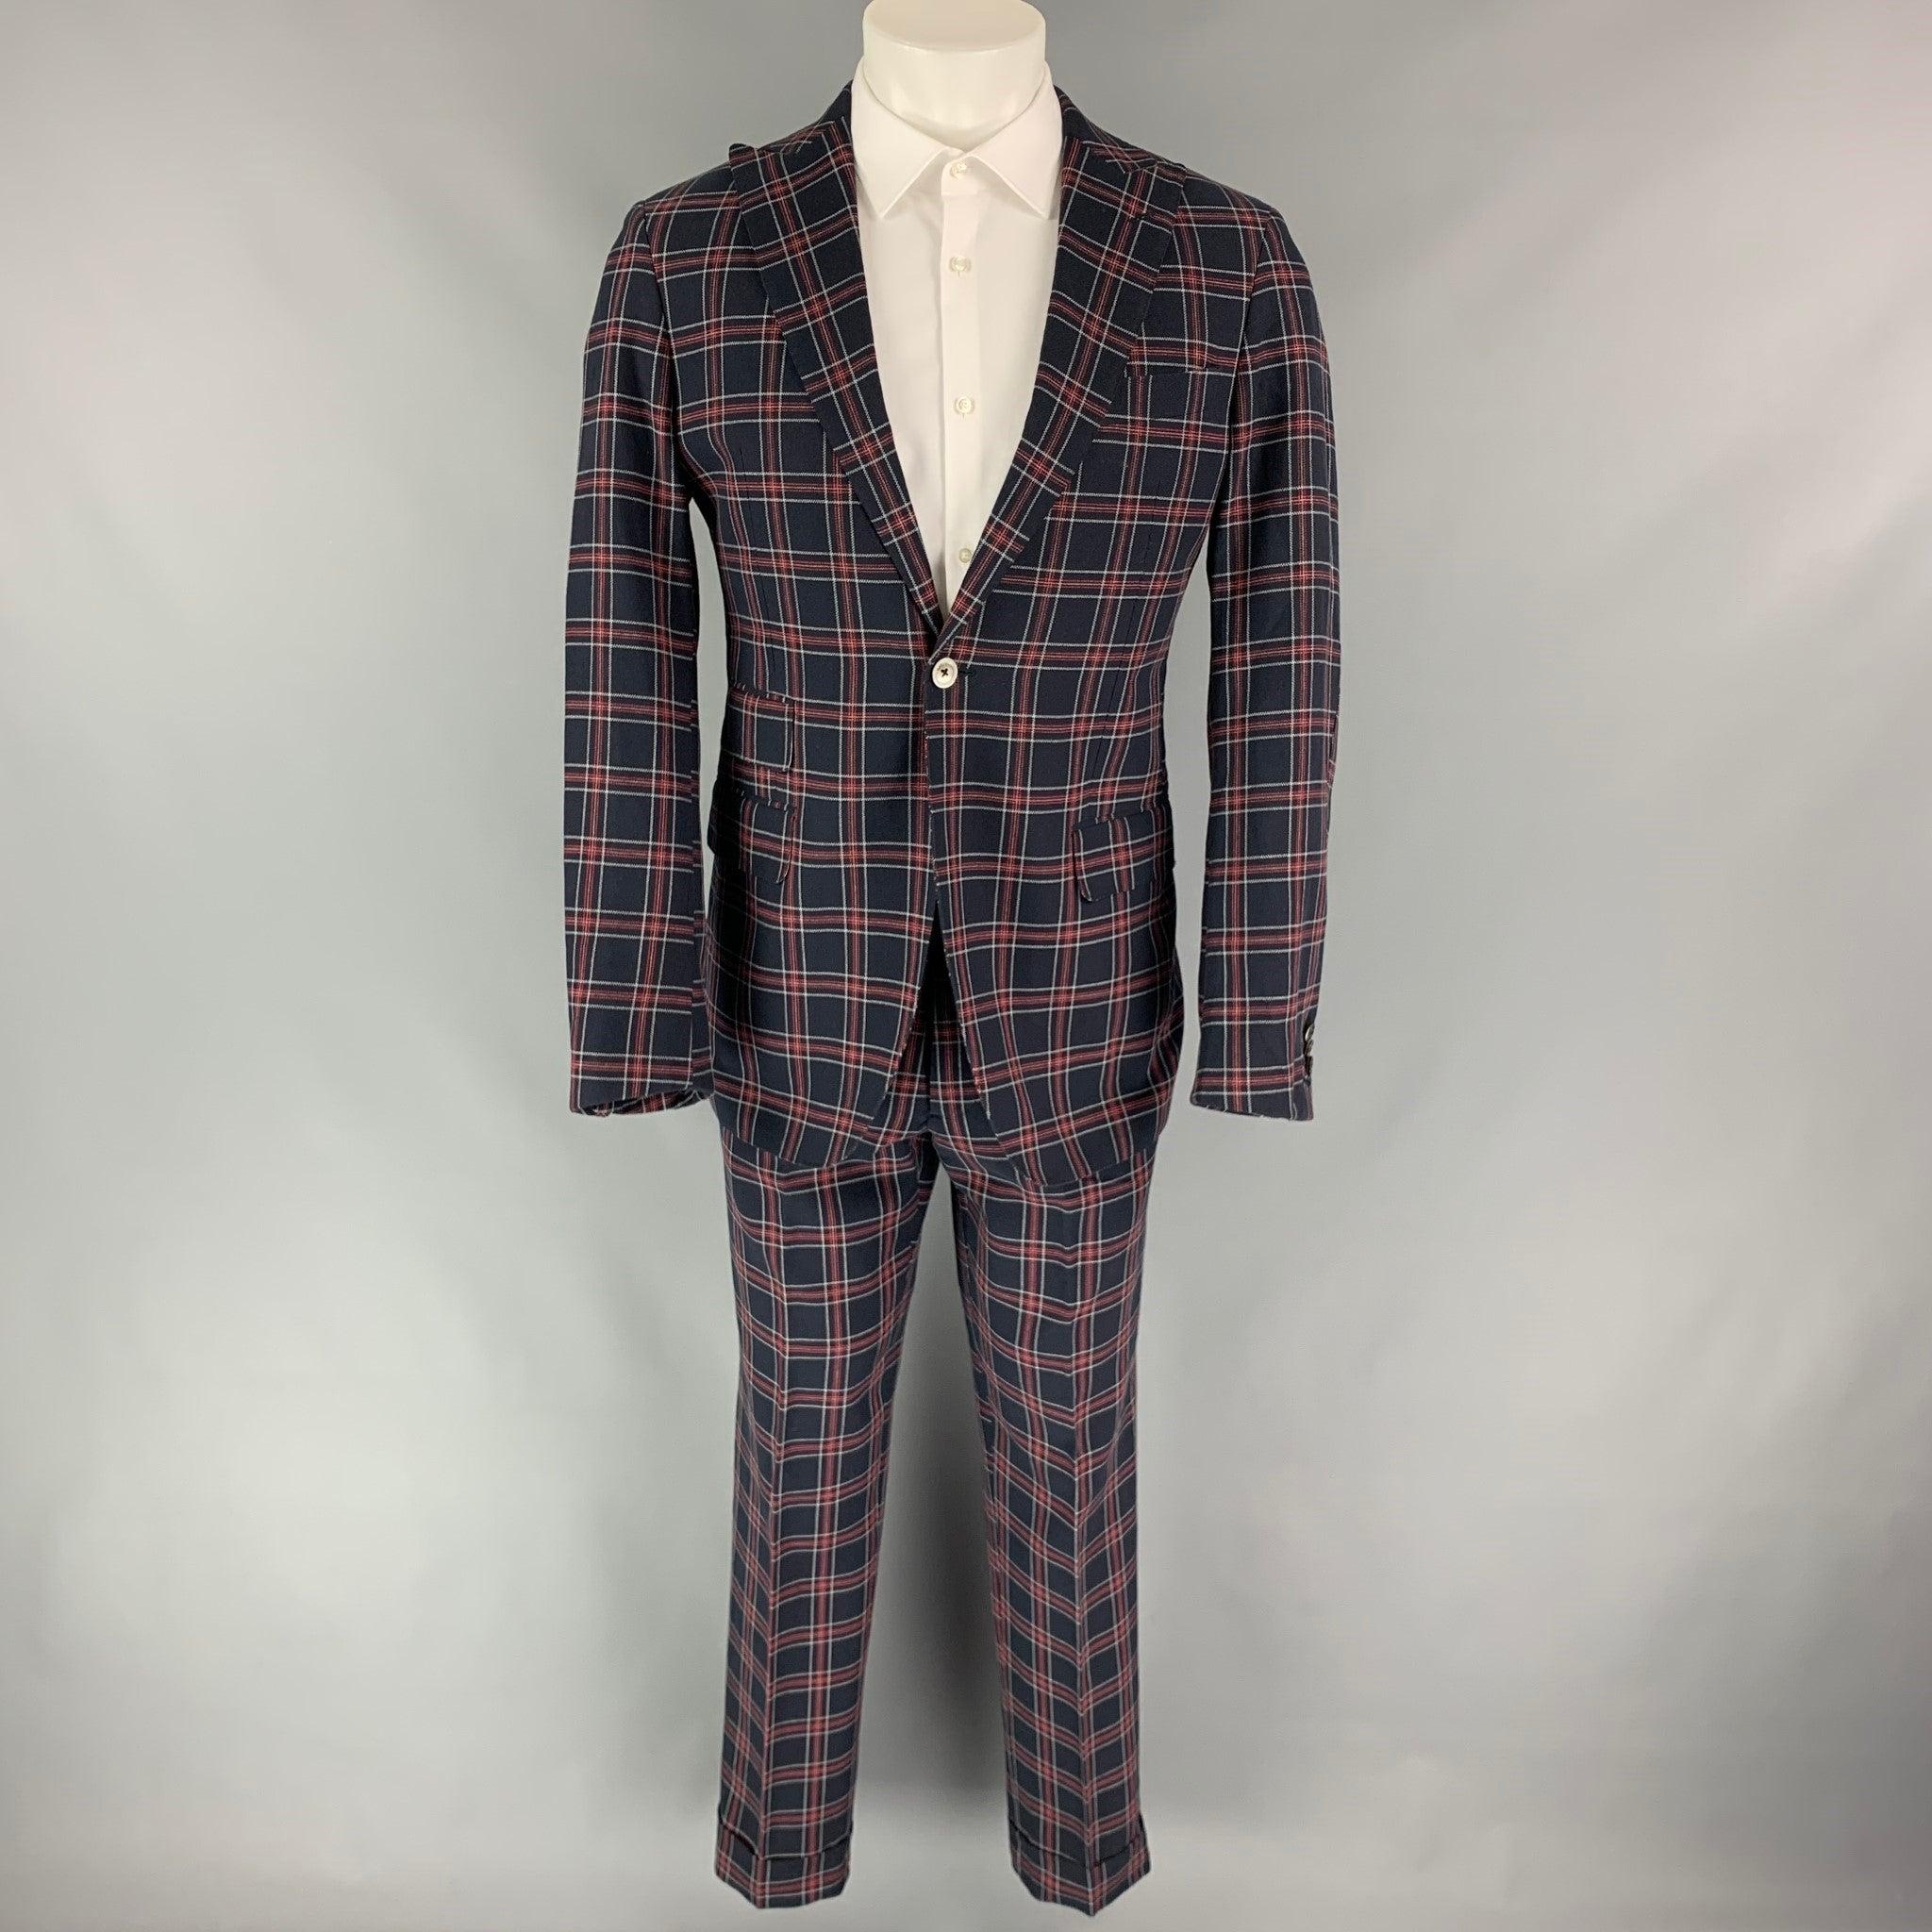 MICHAEL BASTIAN
suit comes in navy & red plaid cotton with a full liner and includes a single breasted, single button sport coat with a peak
 lapel and matching flat front trousers. Made in Italy.Excellent Pre-Owned Condition. 

Marked:   50 R